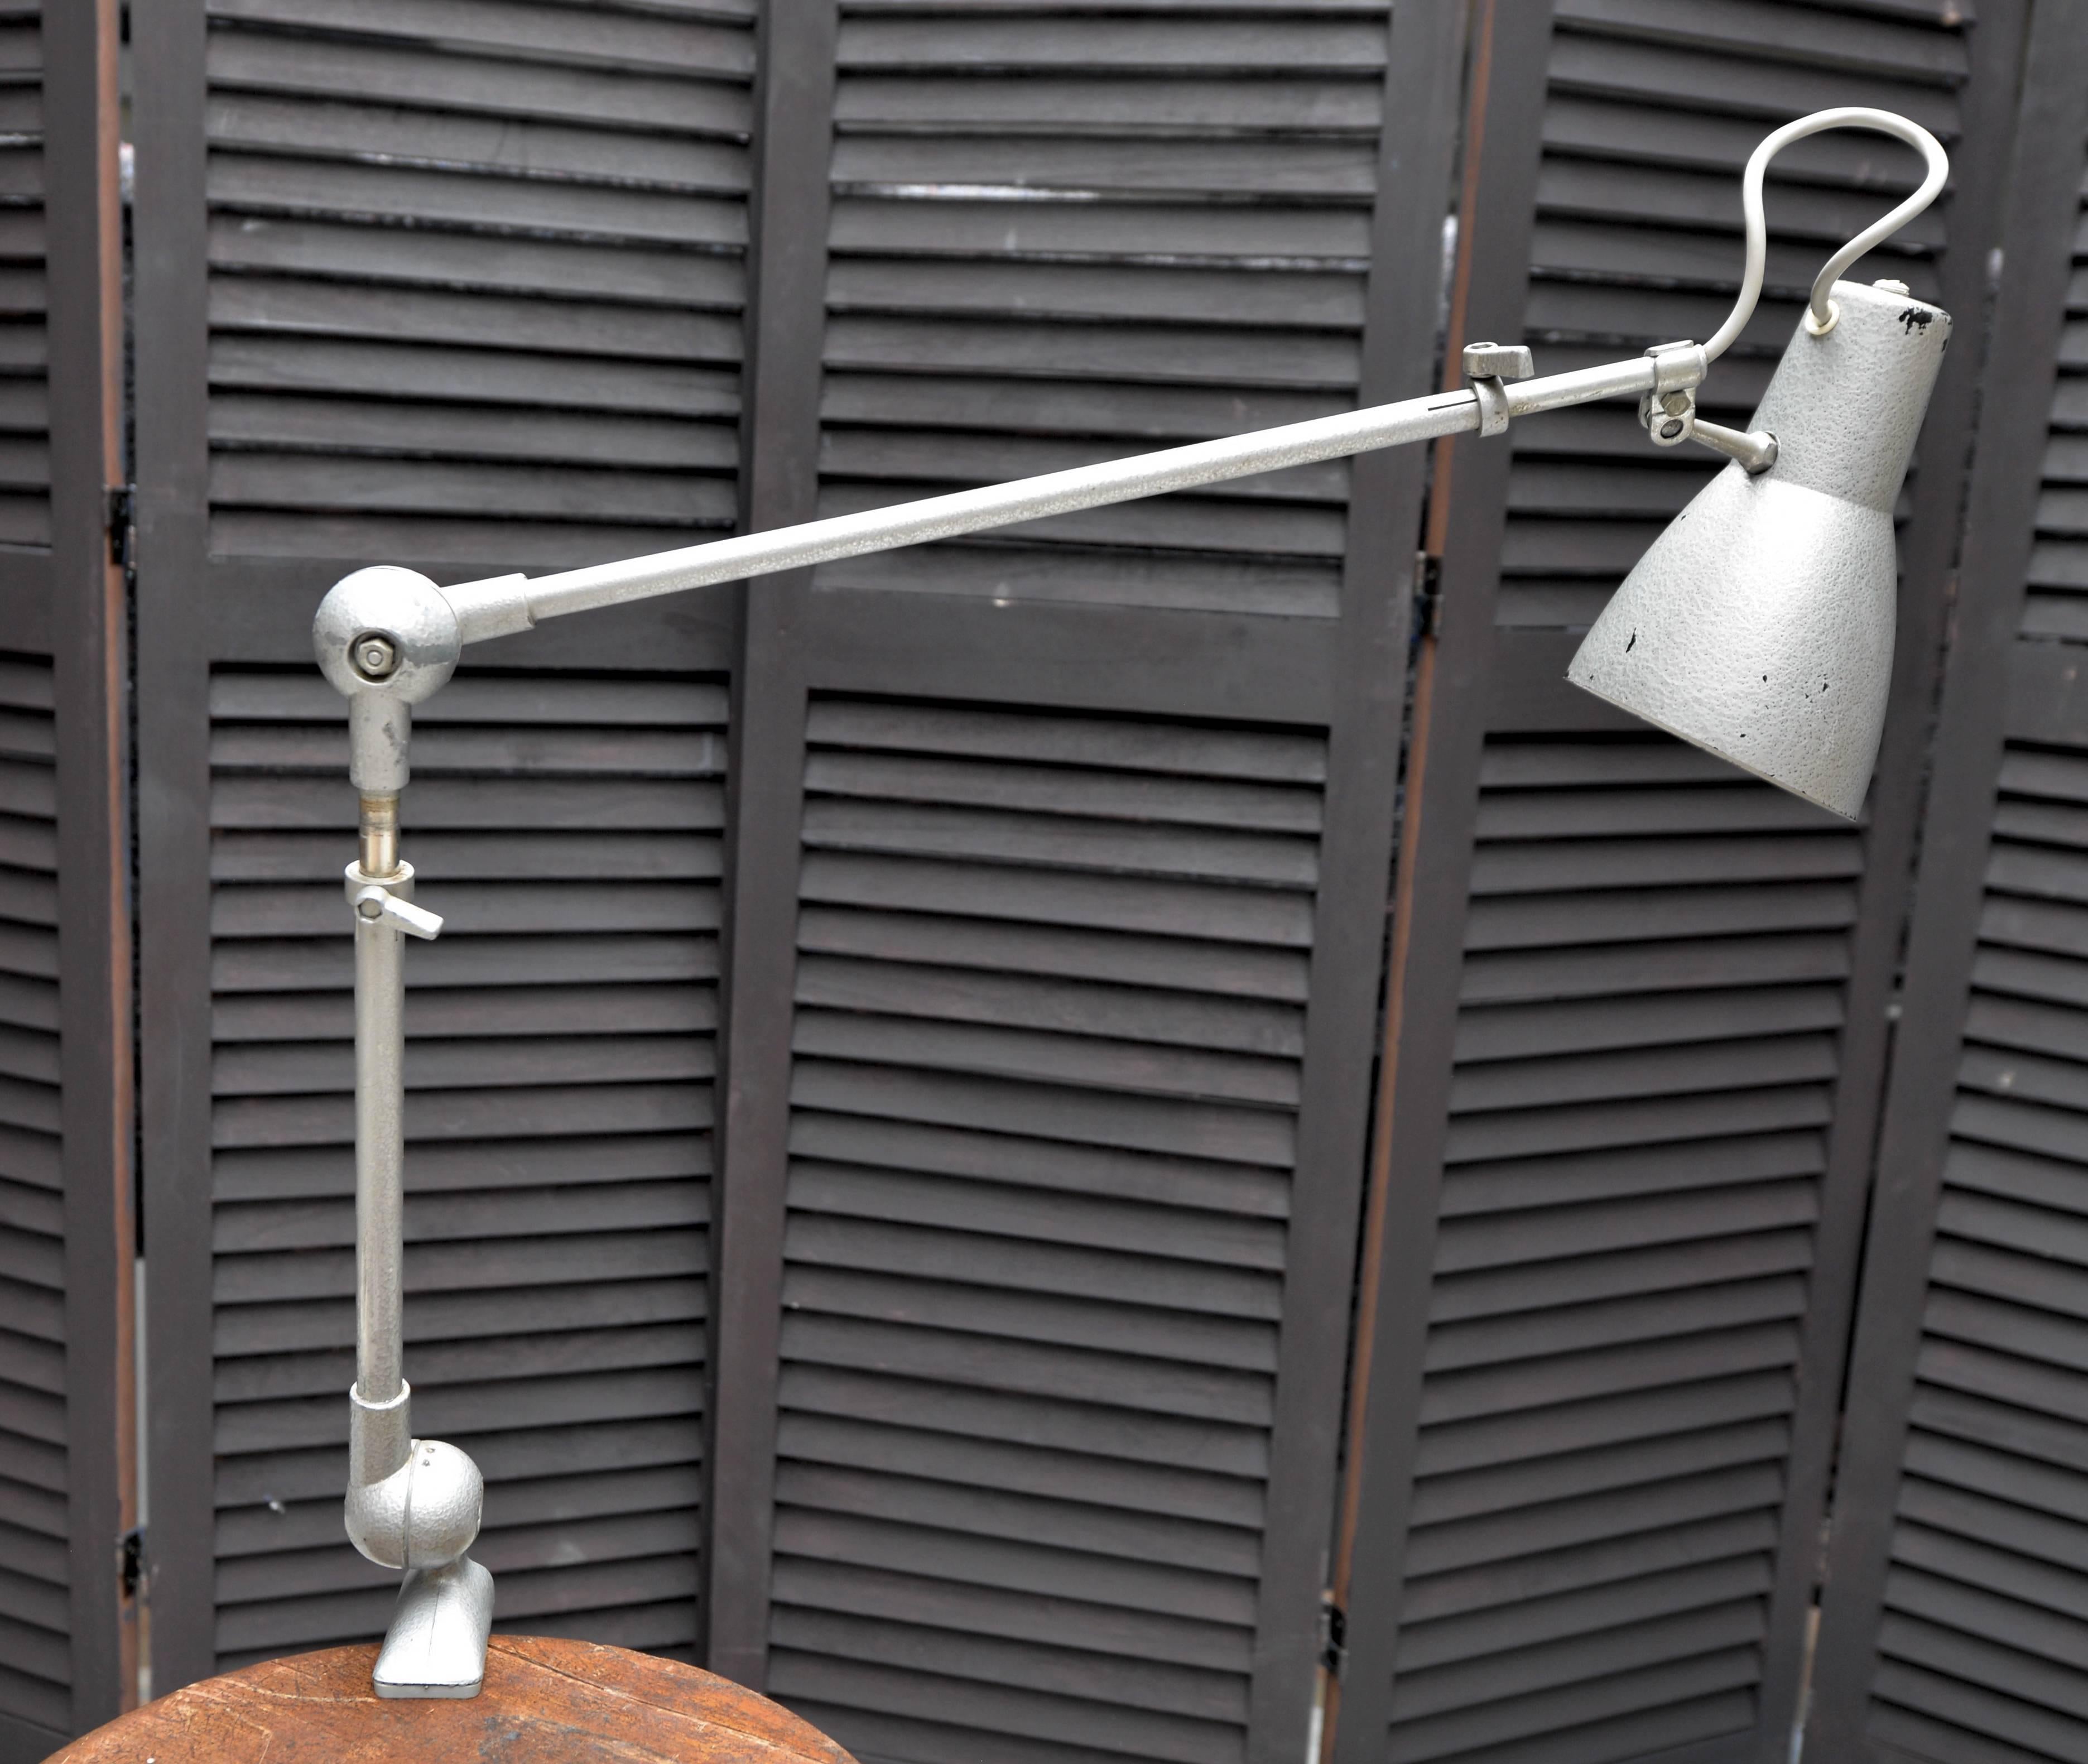 Original French workshop lamp featuring metal structure and plastic reflector.